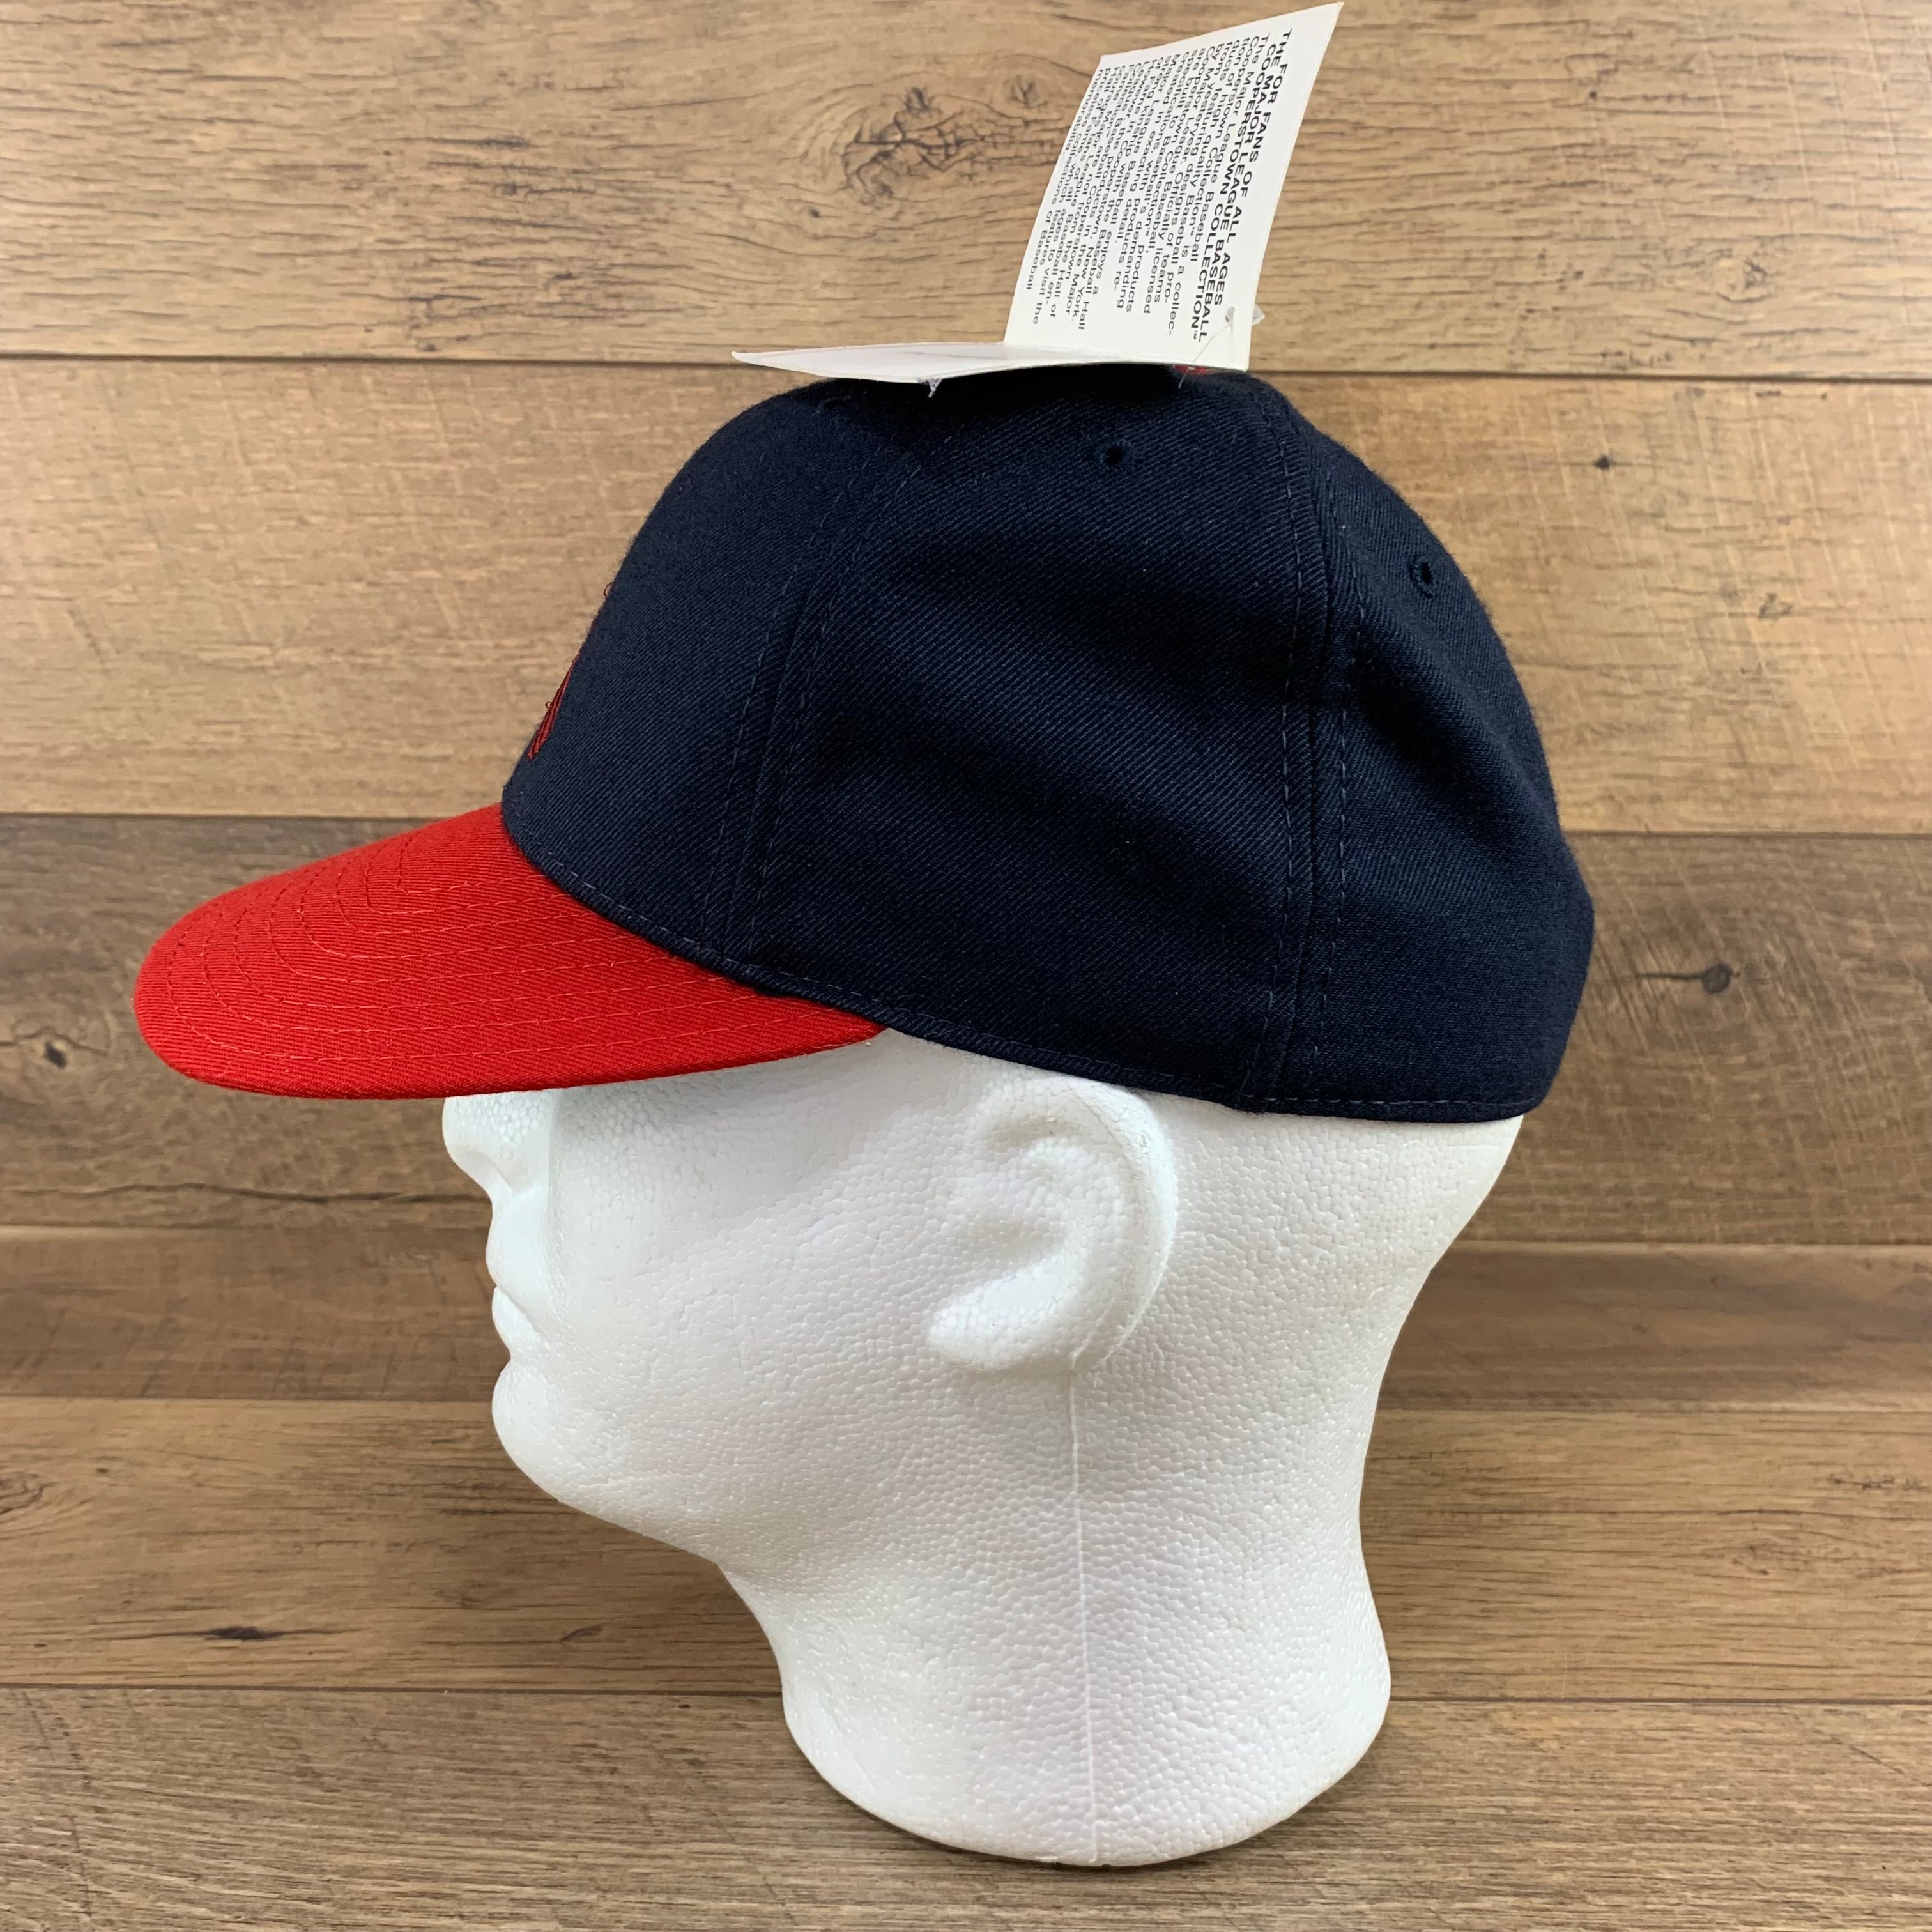 St. Louis Cardinals Pro Cooperstown Nike MLB Adjustable Hat 'Light Blue/Red'  - NK4419M9S67-38W